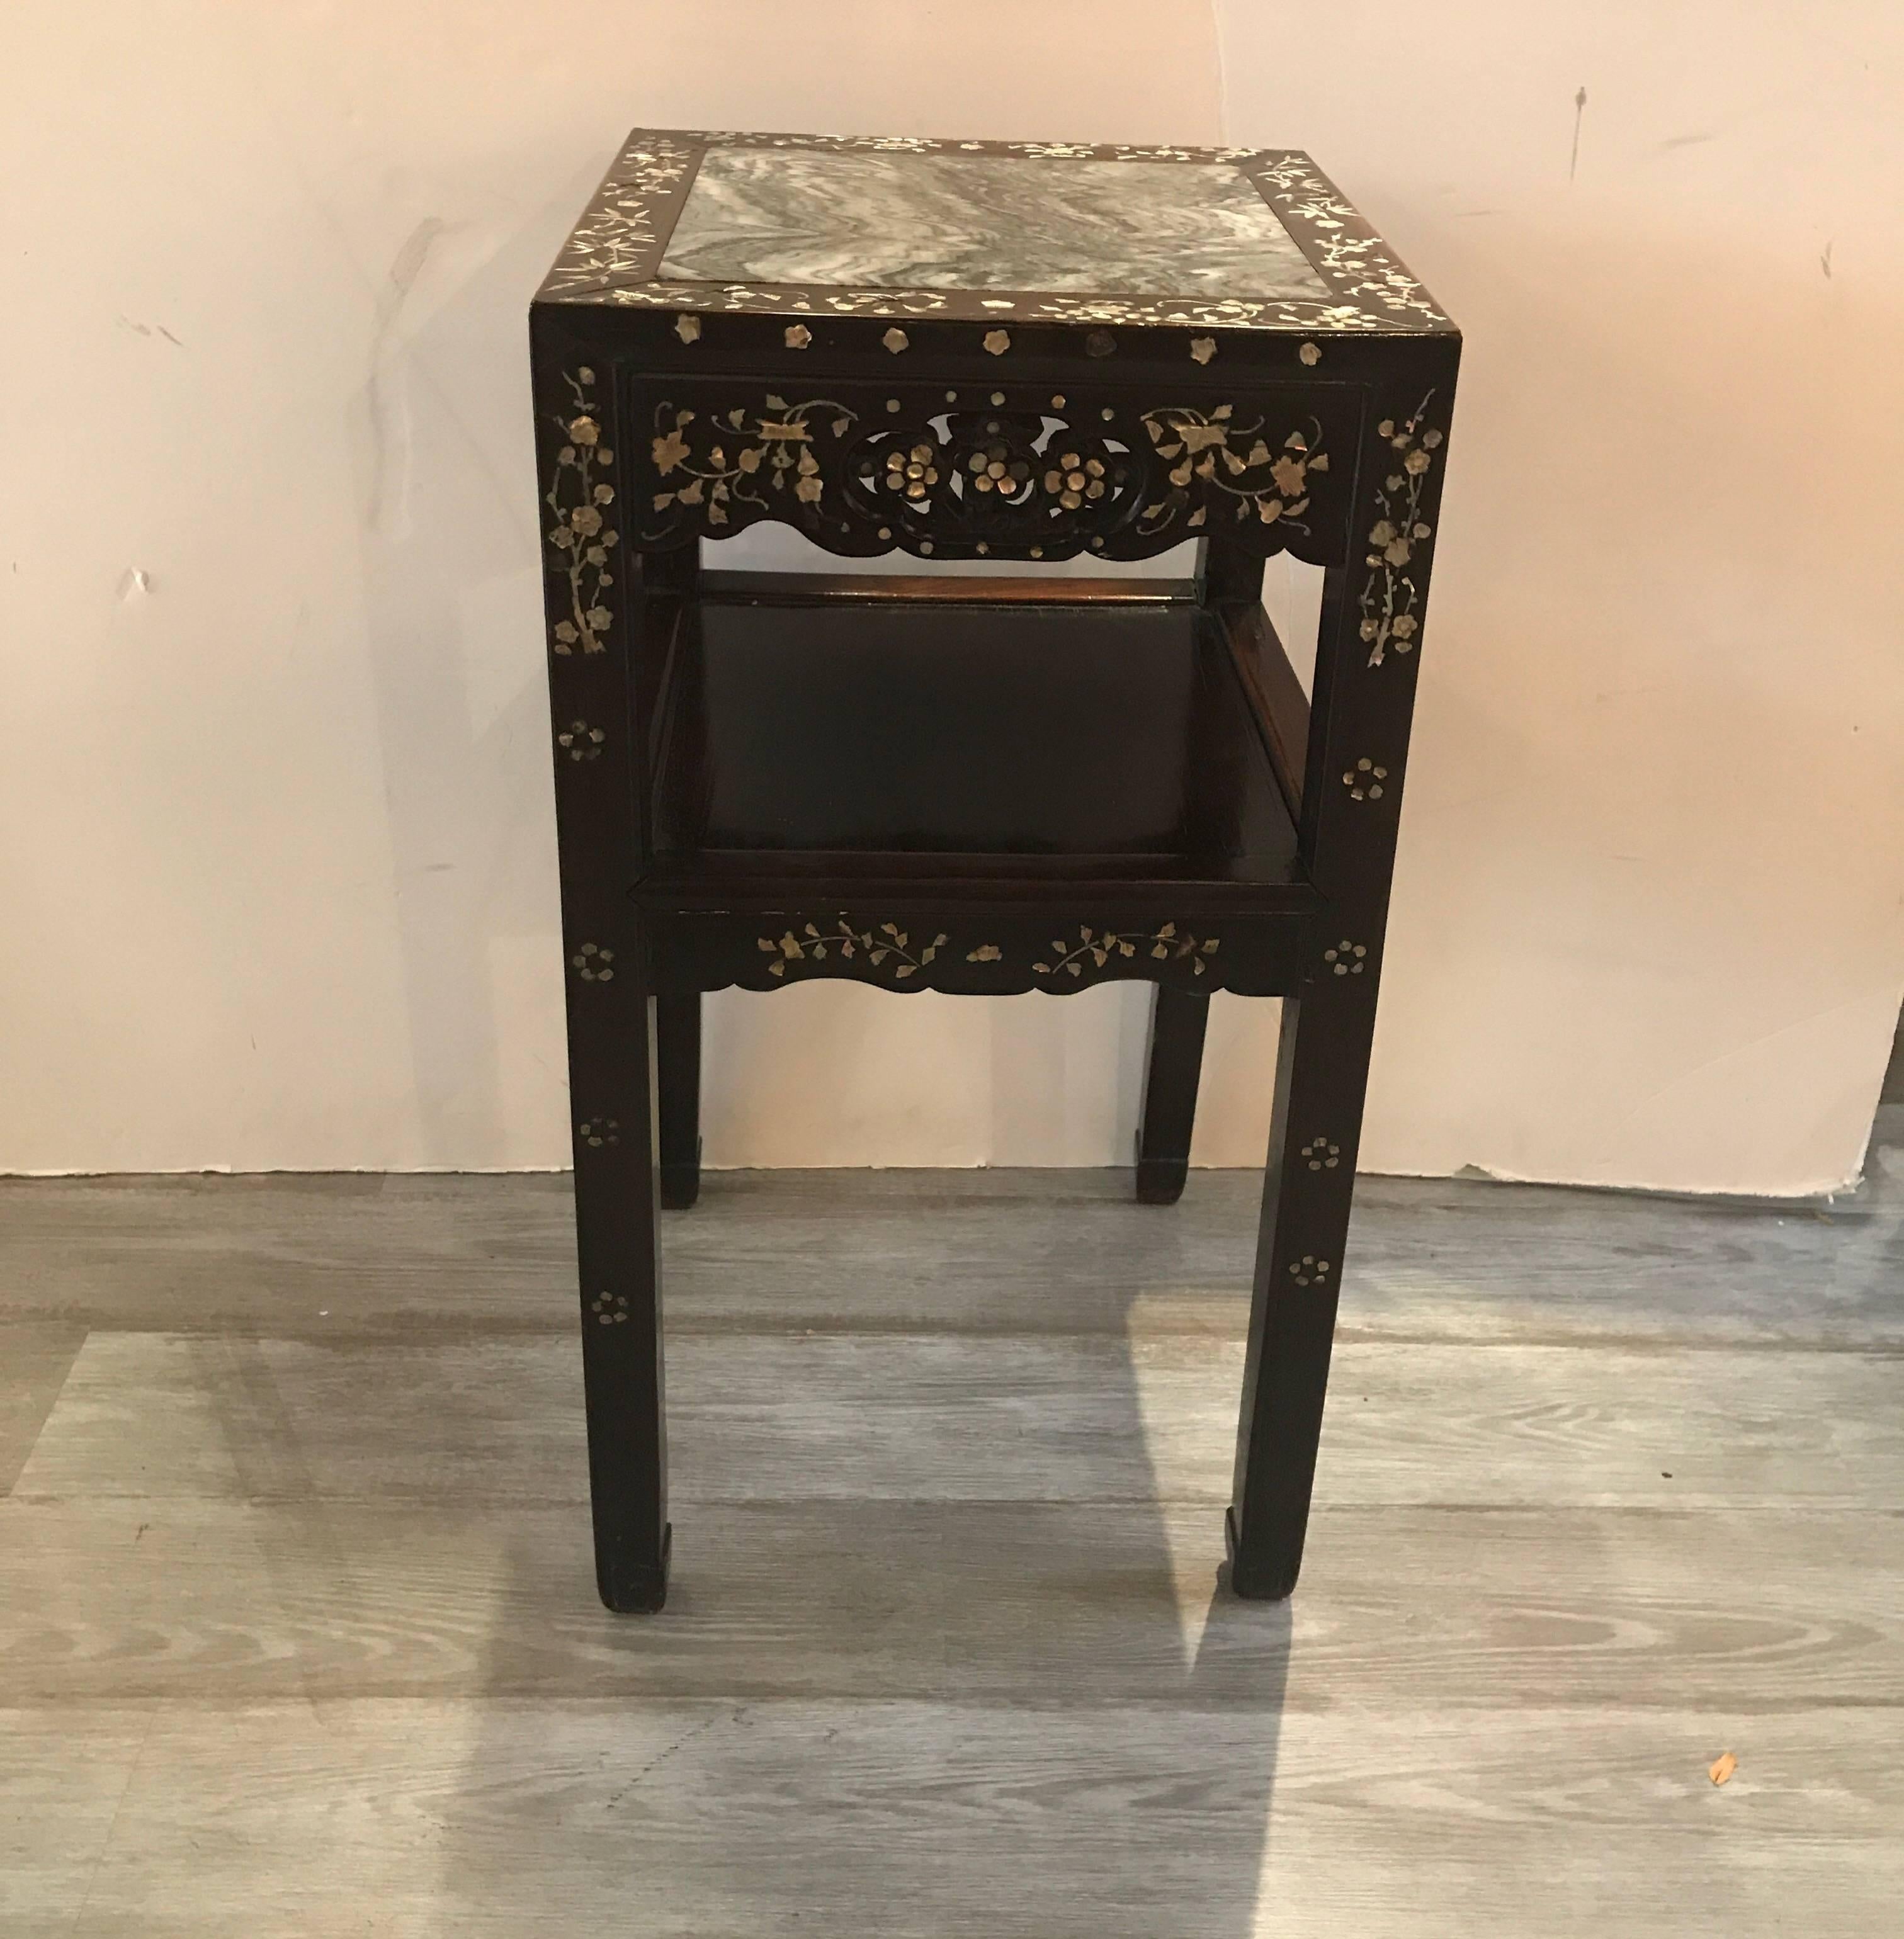 Rare 19th century Chinese rosewood stand with shelf. The rosewood with intricate inlays of mother of pearl all-over. The top is an unusually wavy gray and darker gray stone called dream stone. The frames has some shrinkage and shows some normal